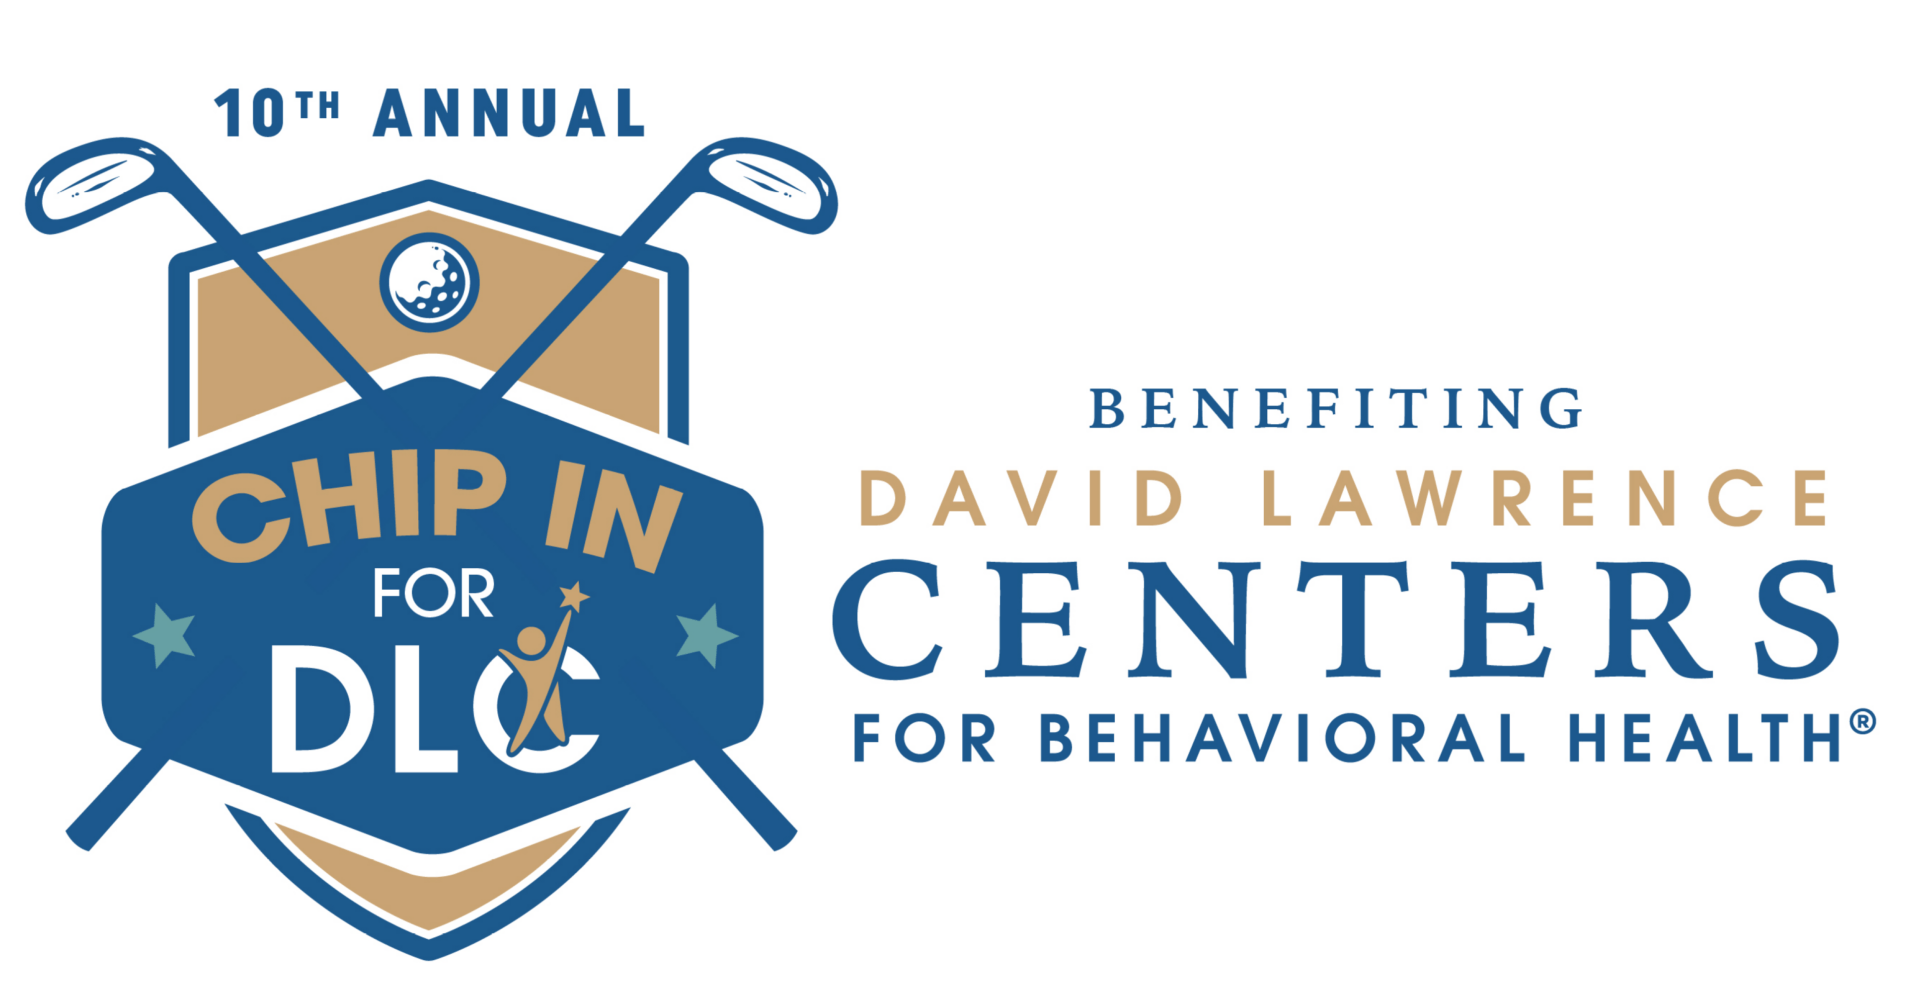 image 1 10th Annual Chip in for DLC Golf Tournament